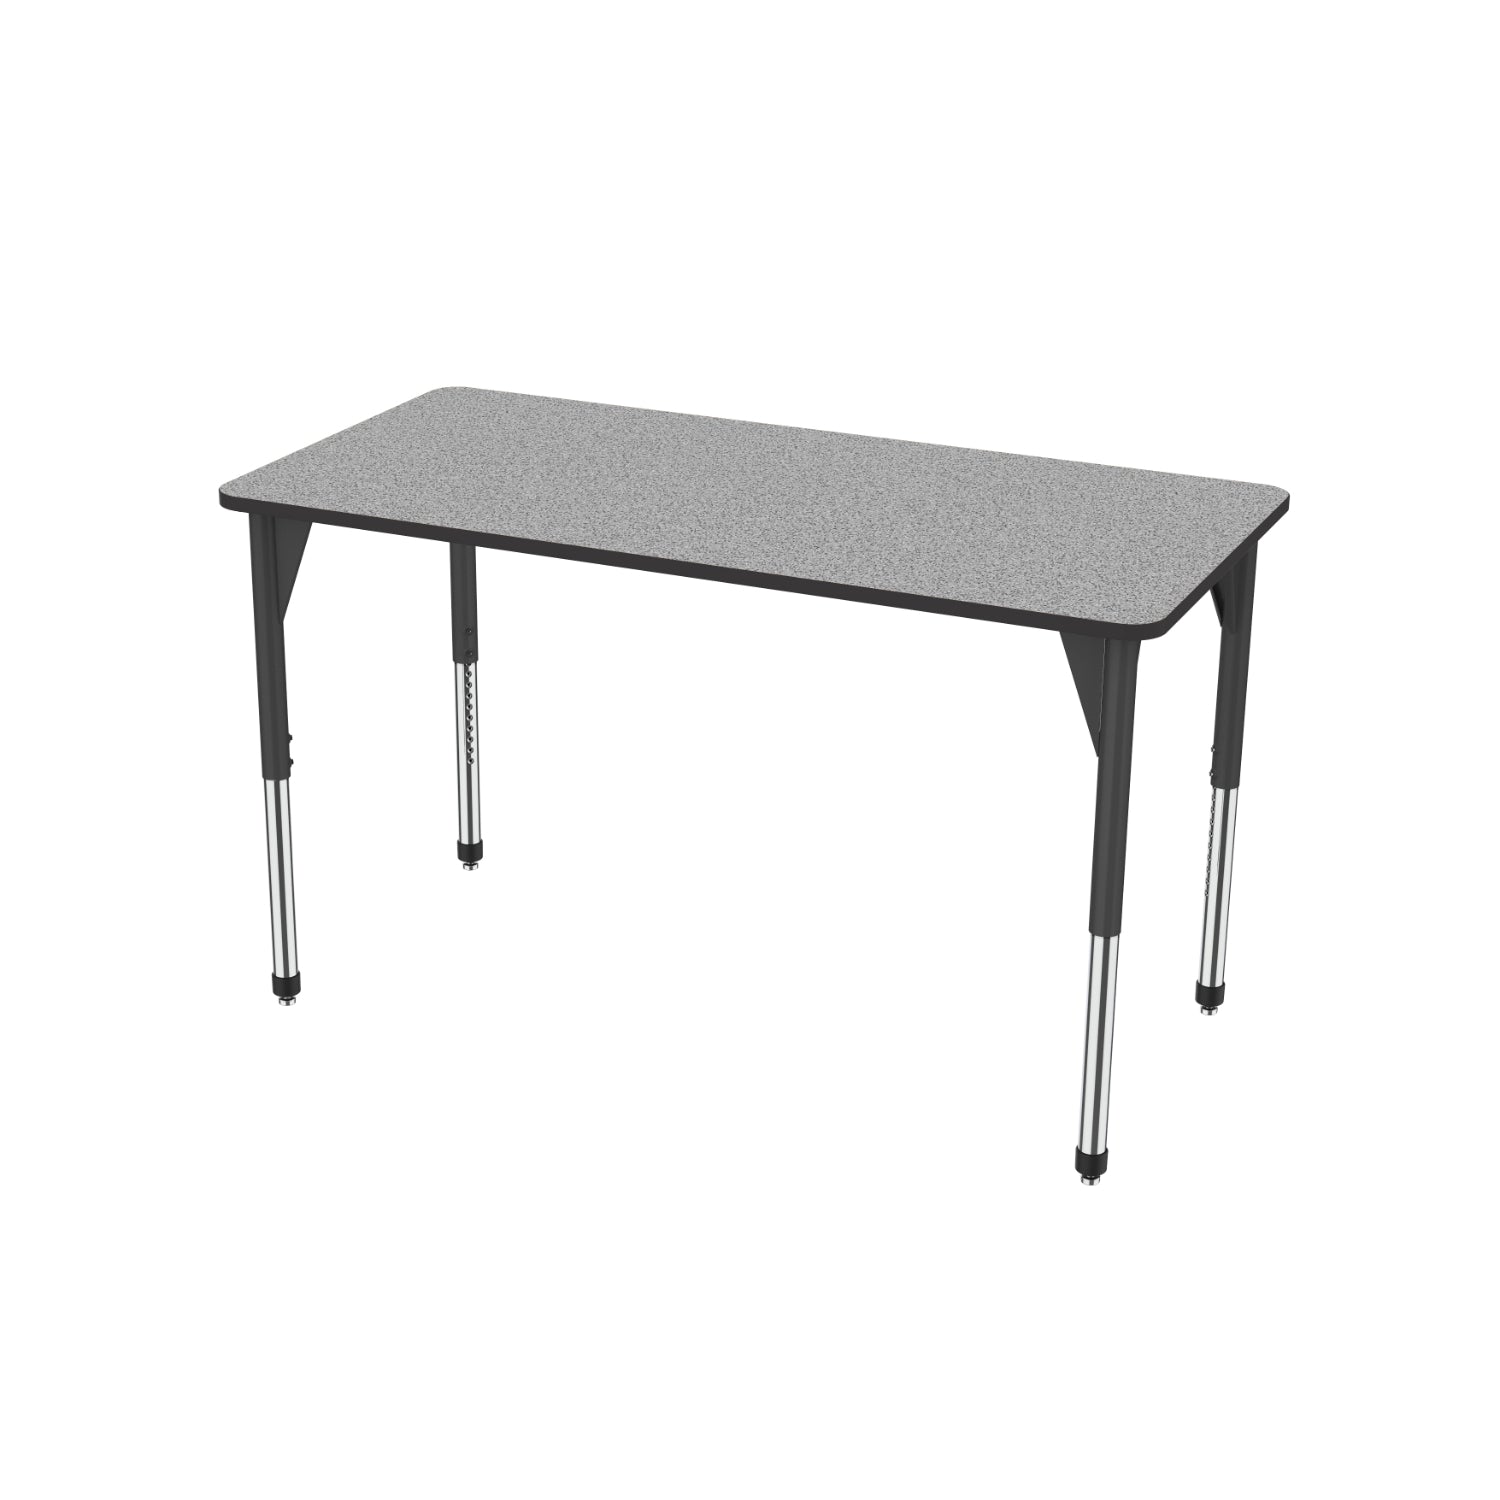 Premier Standing Height Collaborative Classroom Table, 36" x 72" Rectangle